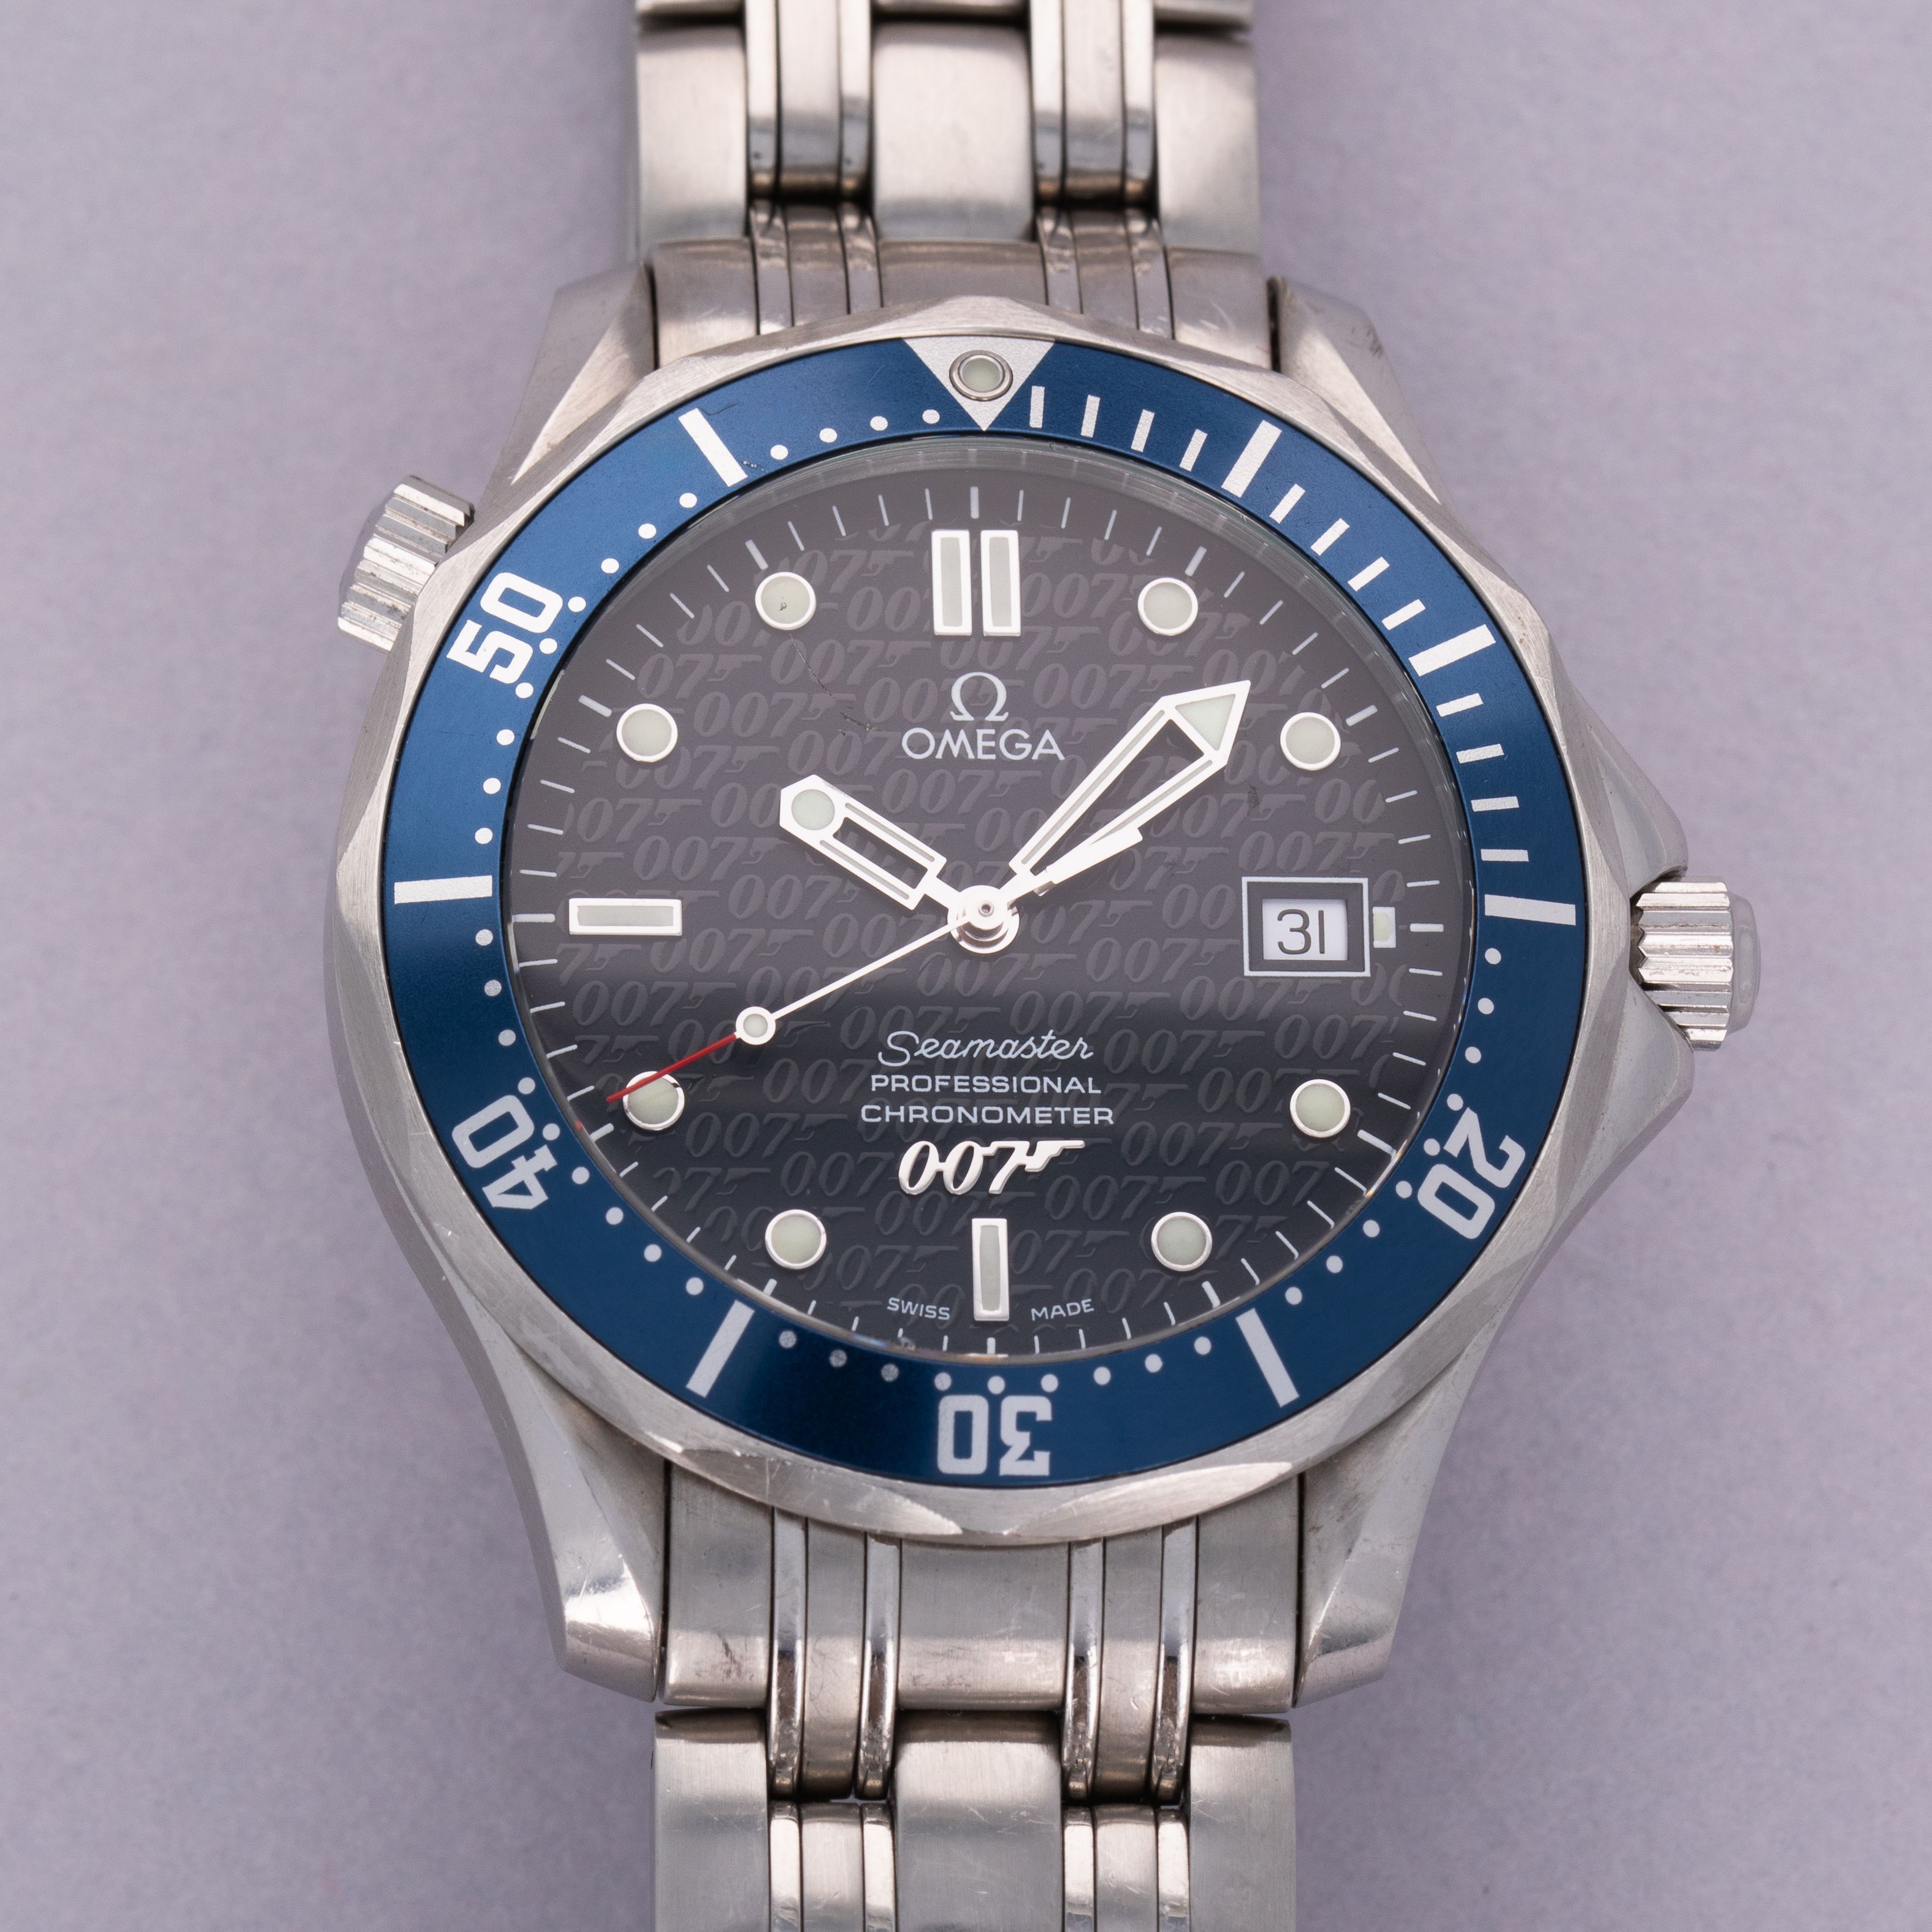 Omega Seamaster James Bond 007 2537.80.00 Limited Edition | Auctions |  Loupe This